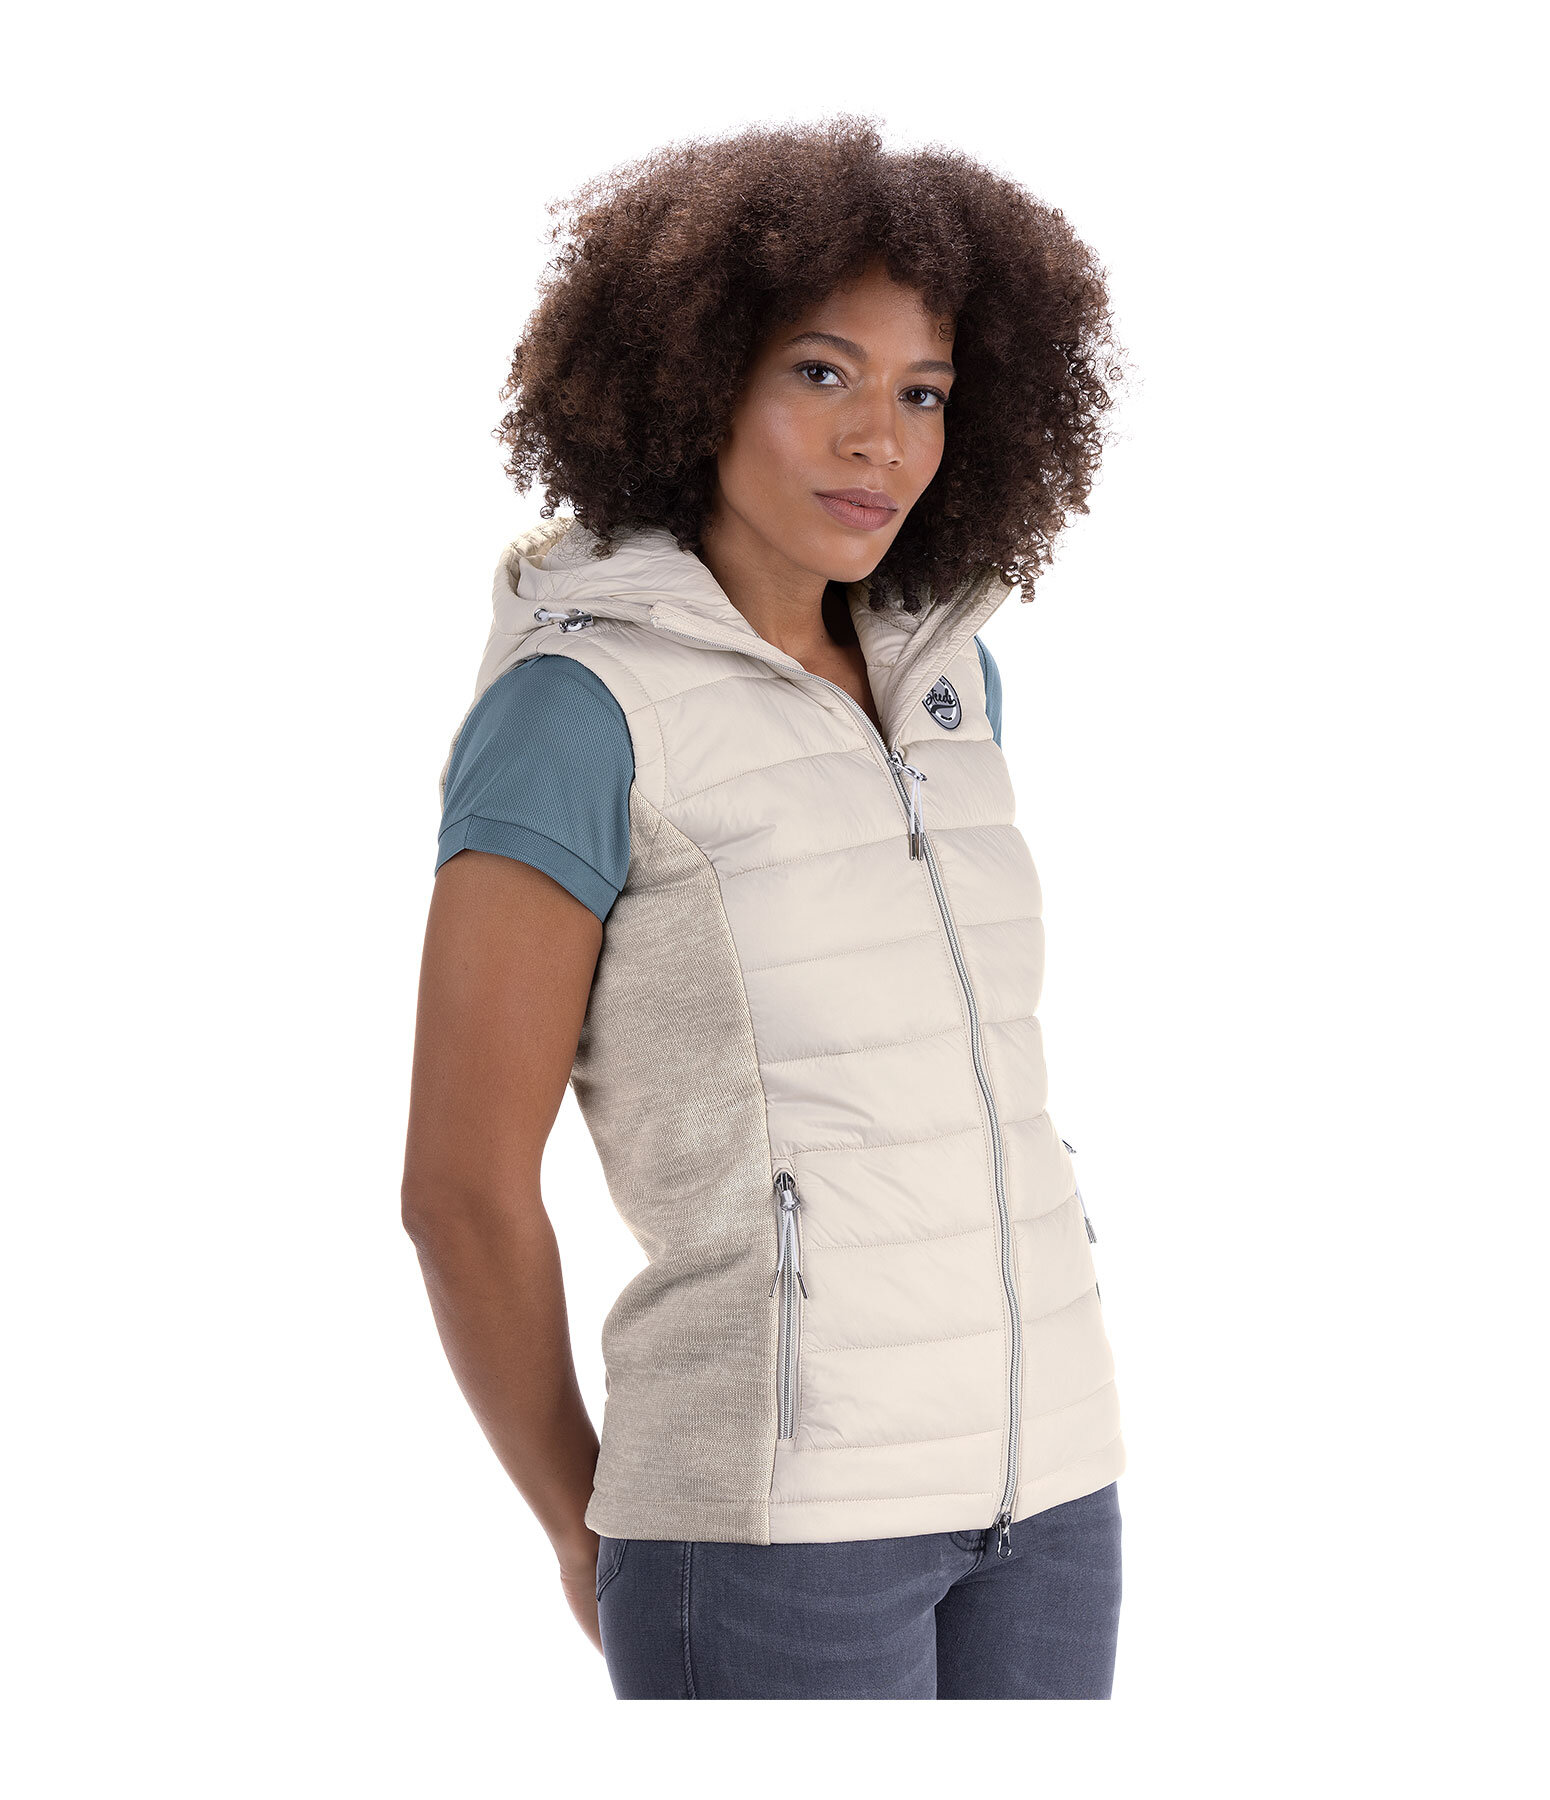 Hooded Combination Riding Gilet Cleo